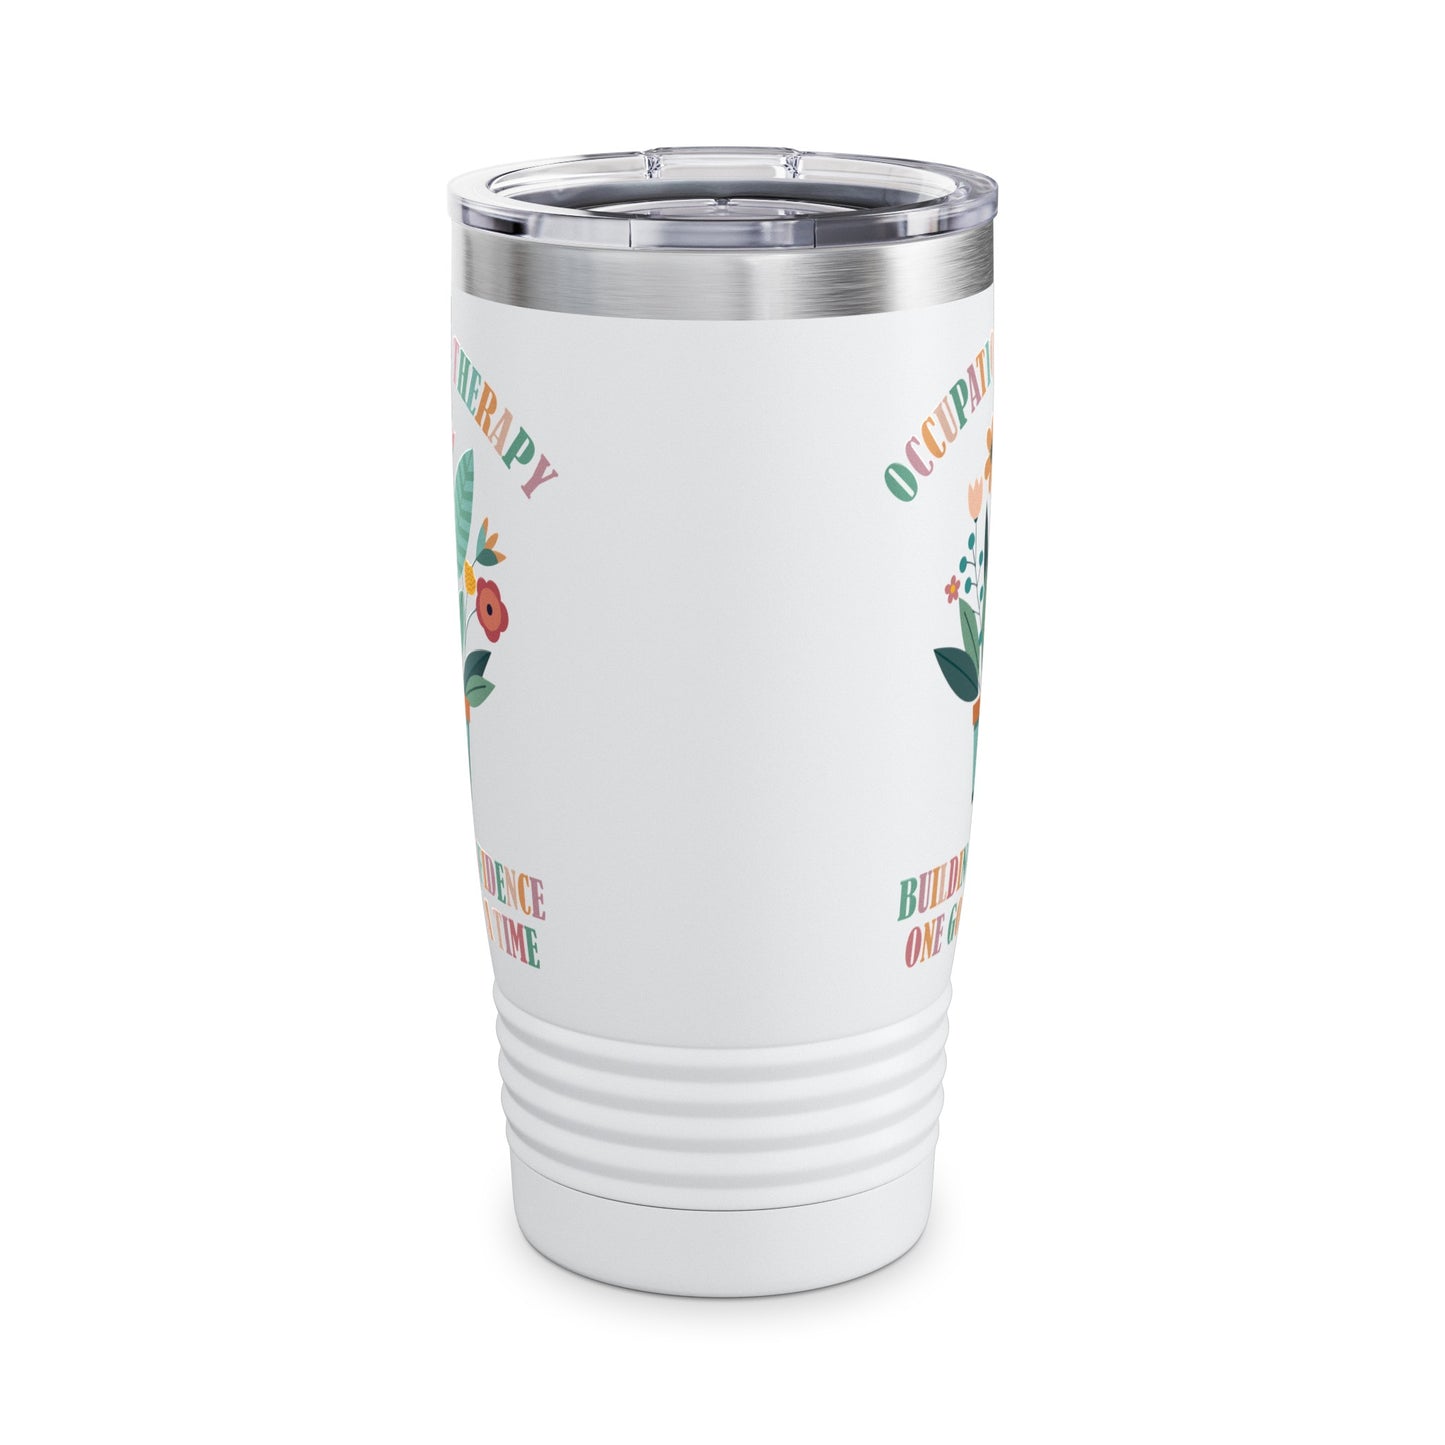 Occupational Therapy Tumbler, Building Confidence One Goal At A Time Tumbler, Therapist Tumbler